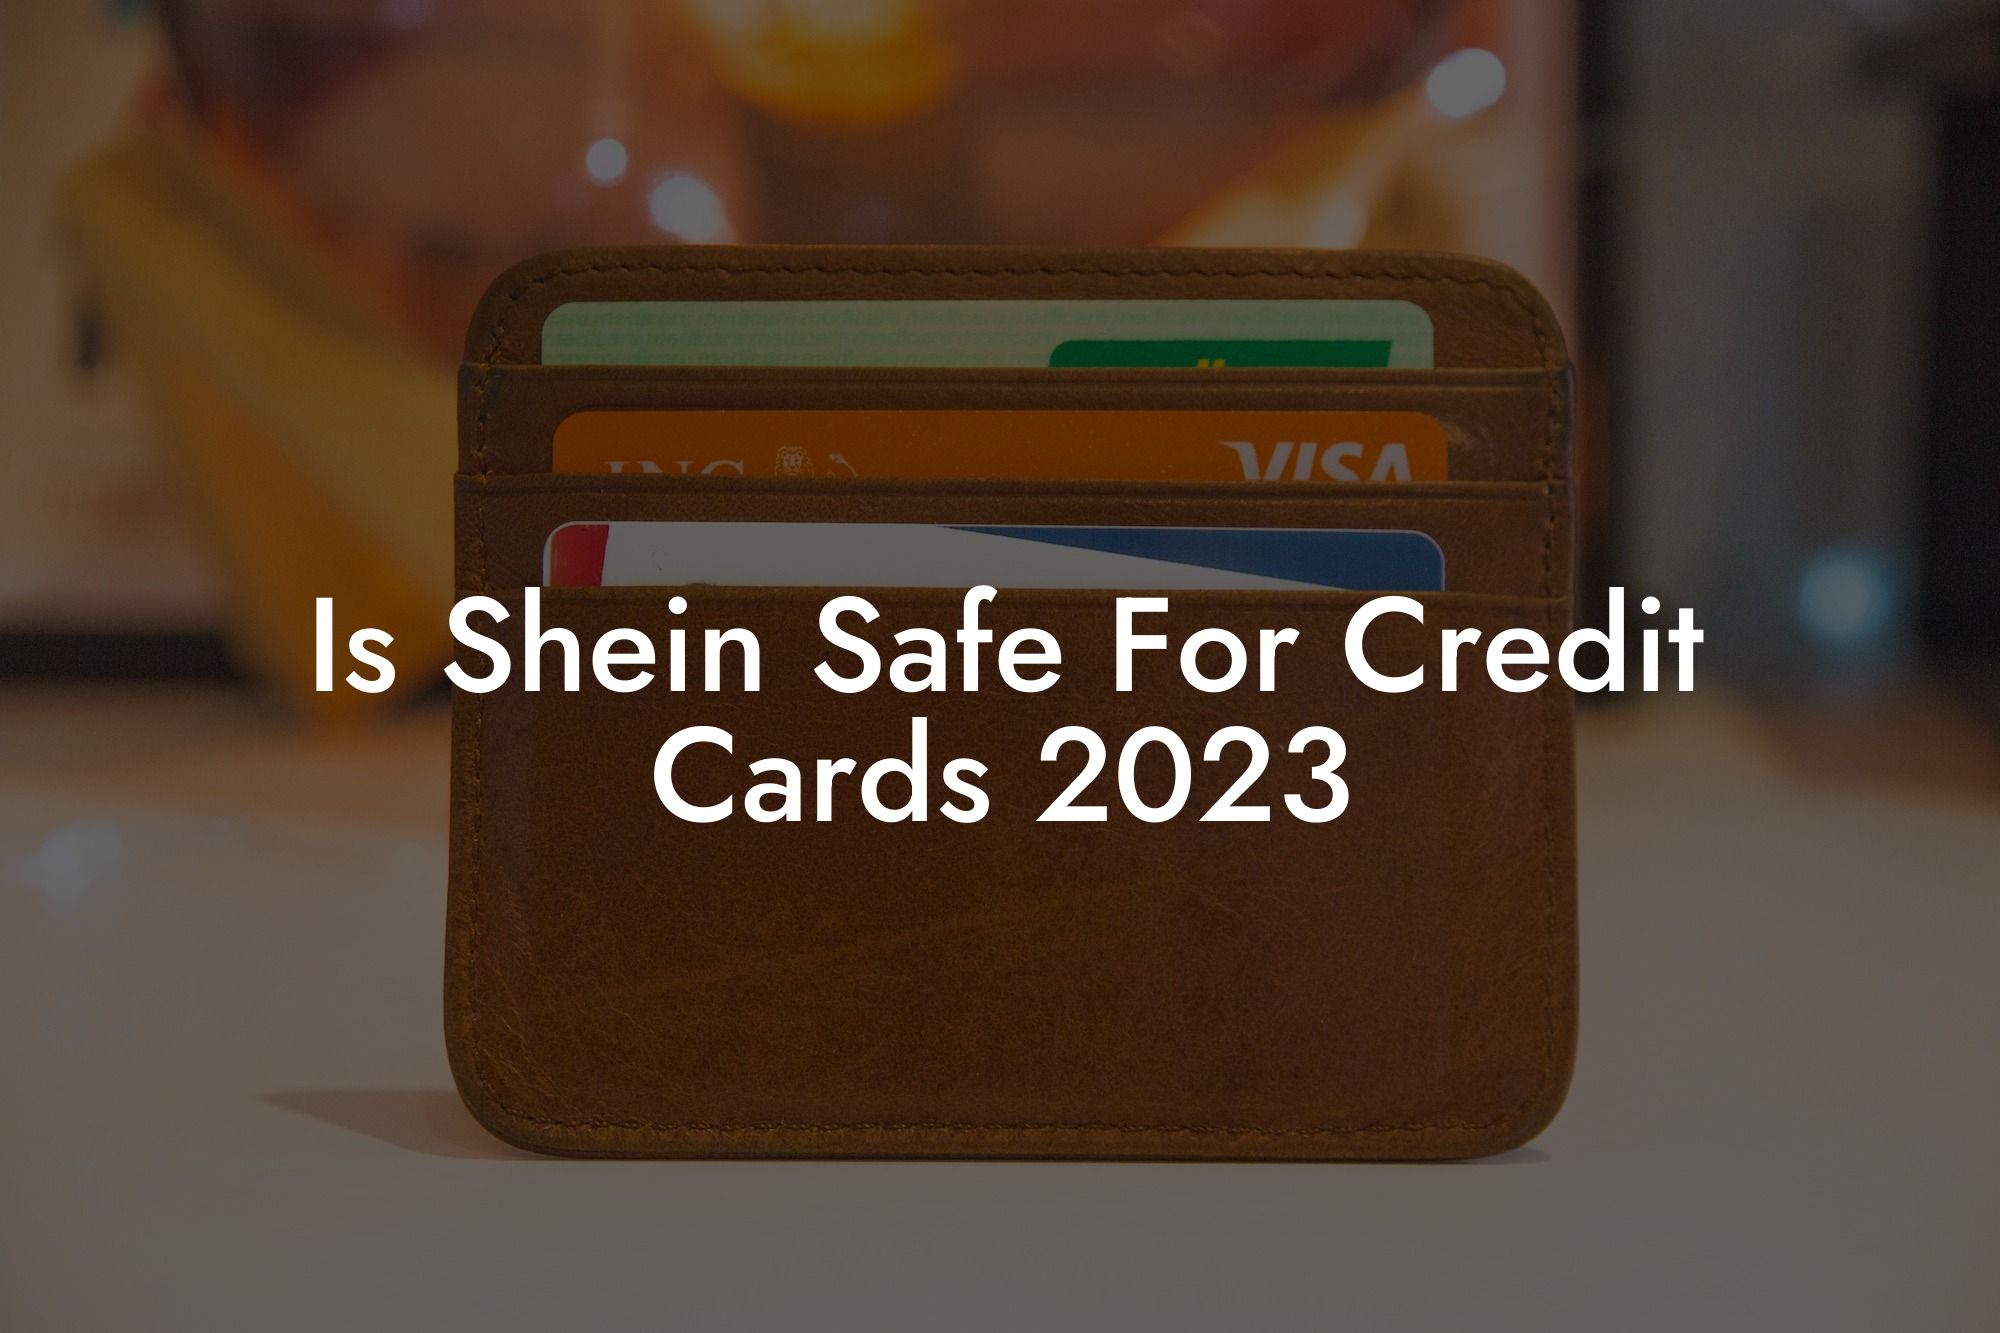 Is Shein Safe For Credit Cards 2023